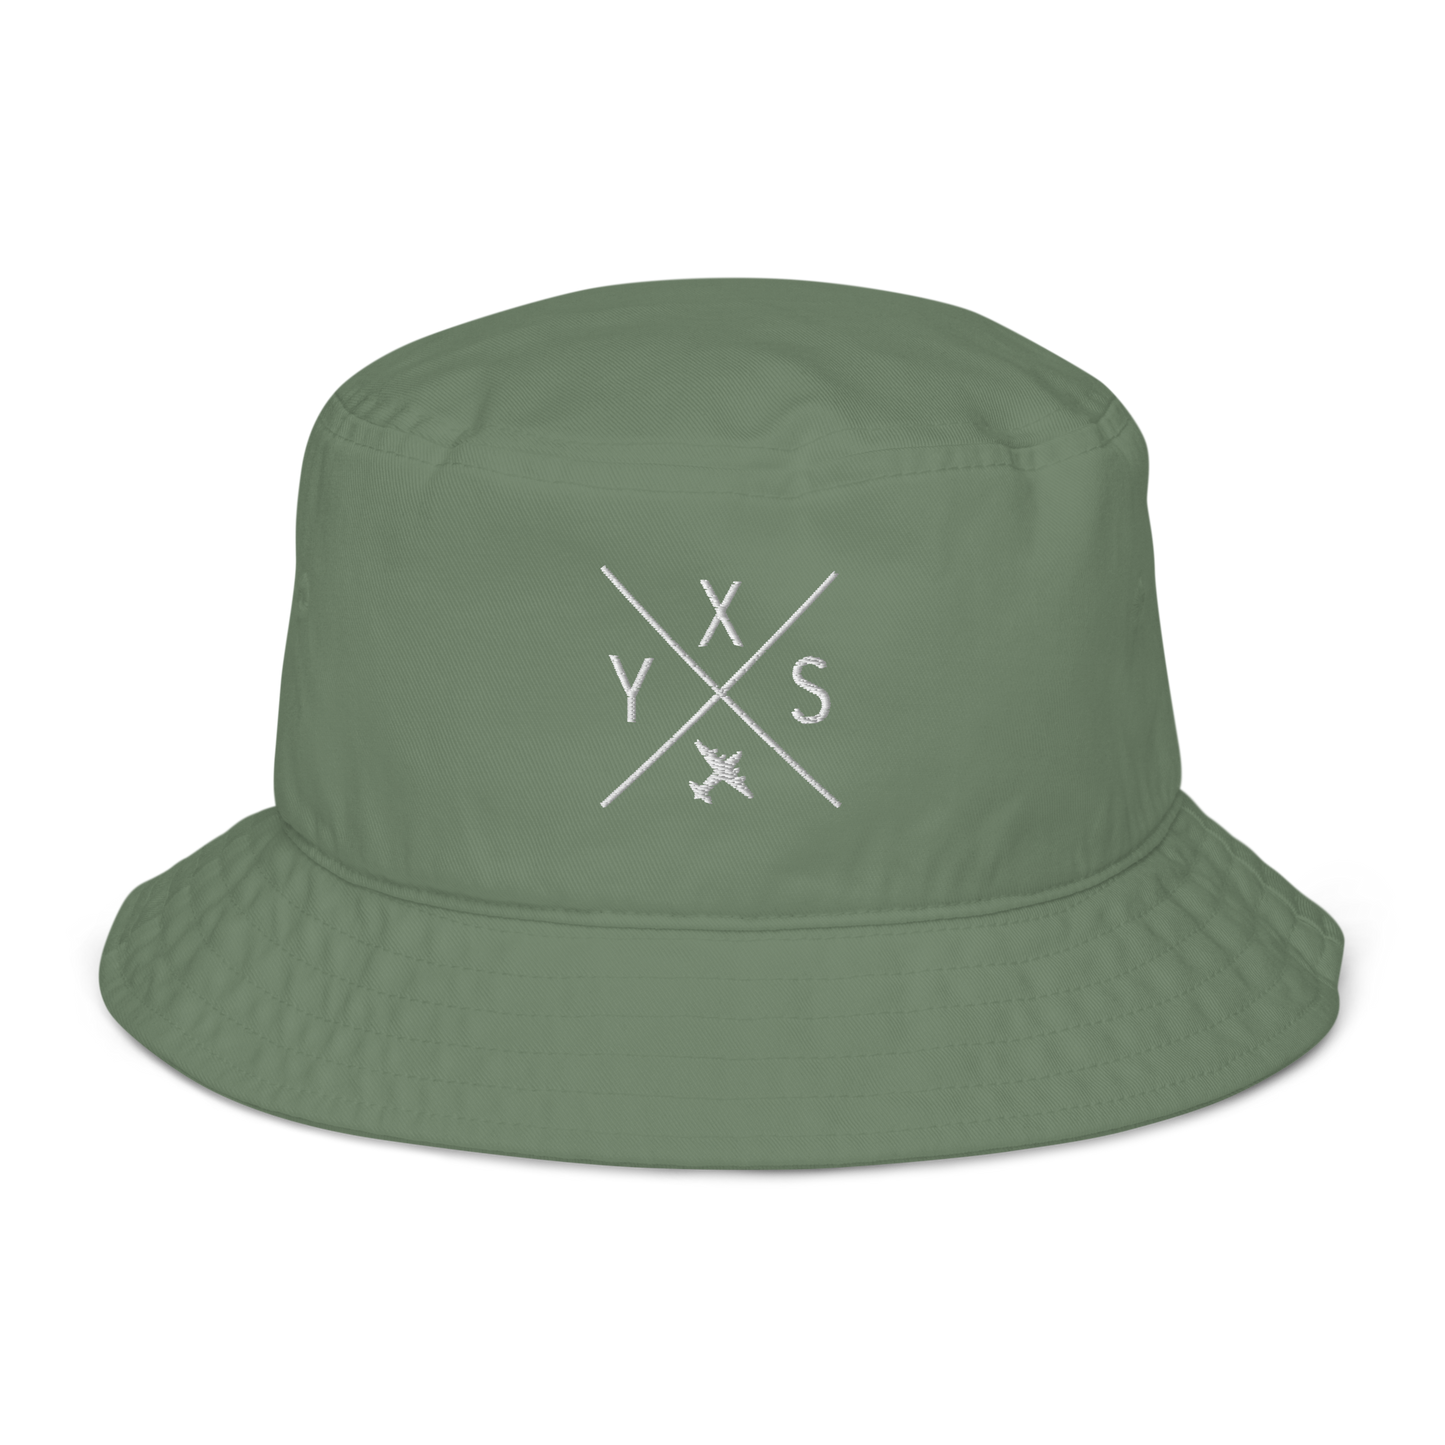 YHM Designs - YXU London Organic Cotton Bucket Hat - Crossed-X Design with Airport Code and Vintage Propliner - White Embroidery - Image 06